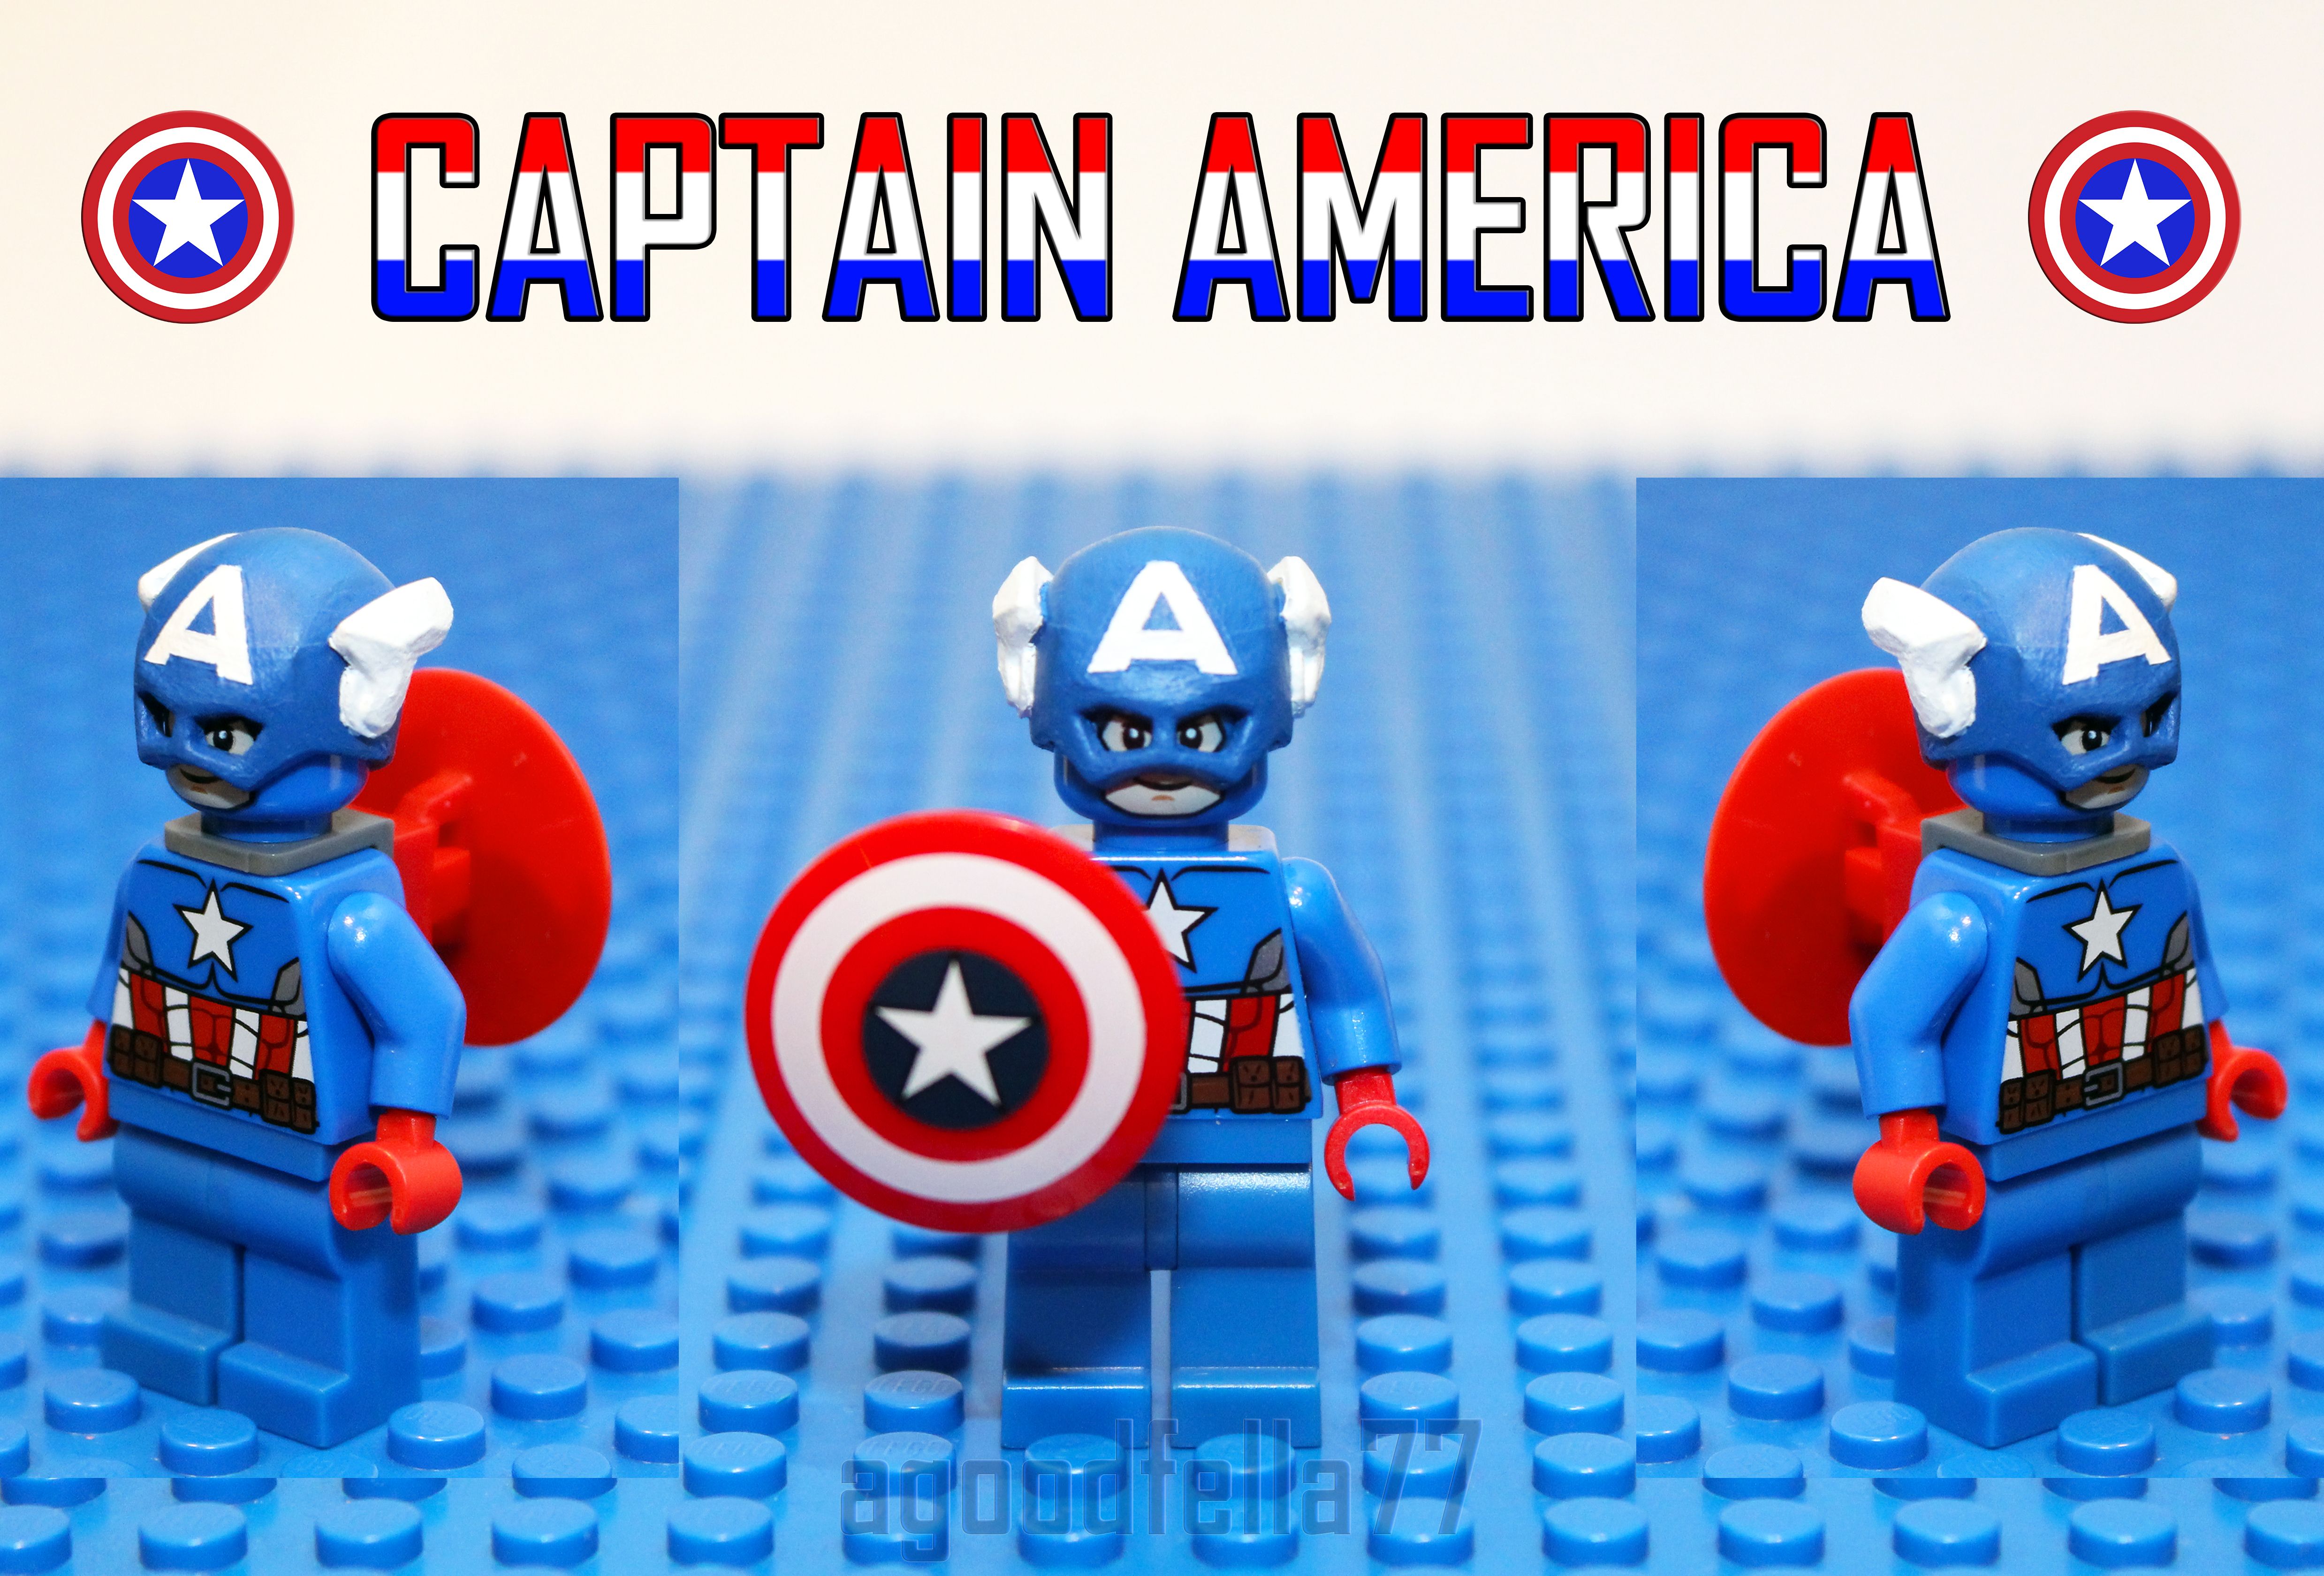 Wallpaper, Toy, product, fictional character, Captain America, technology, LEGO, superhero, toy block, font 4954x3359